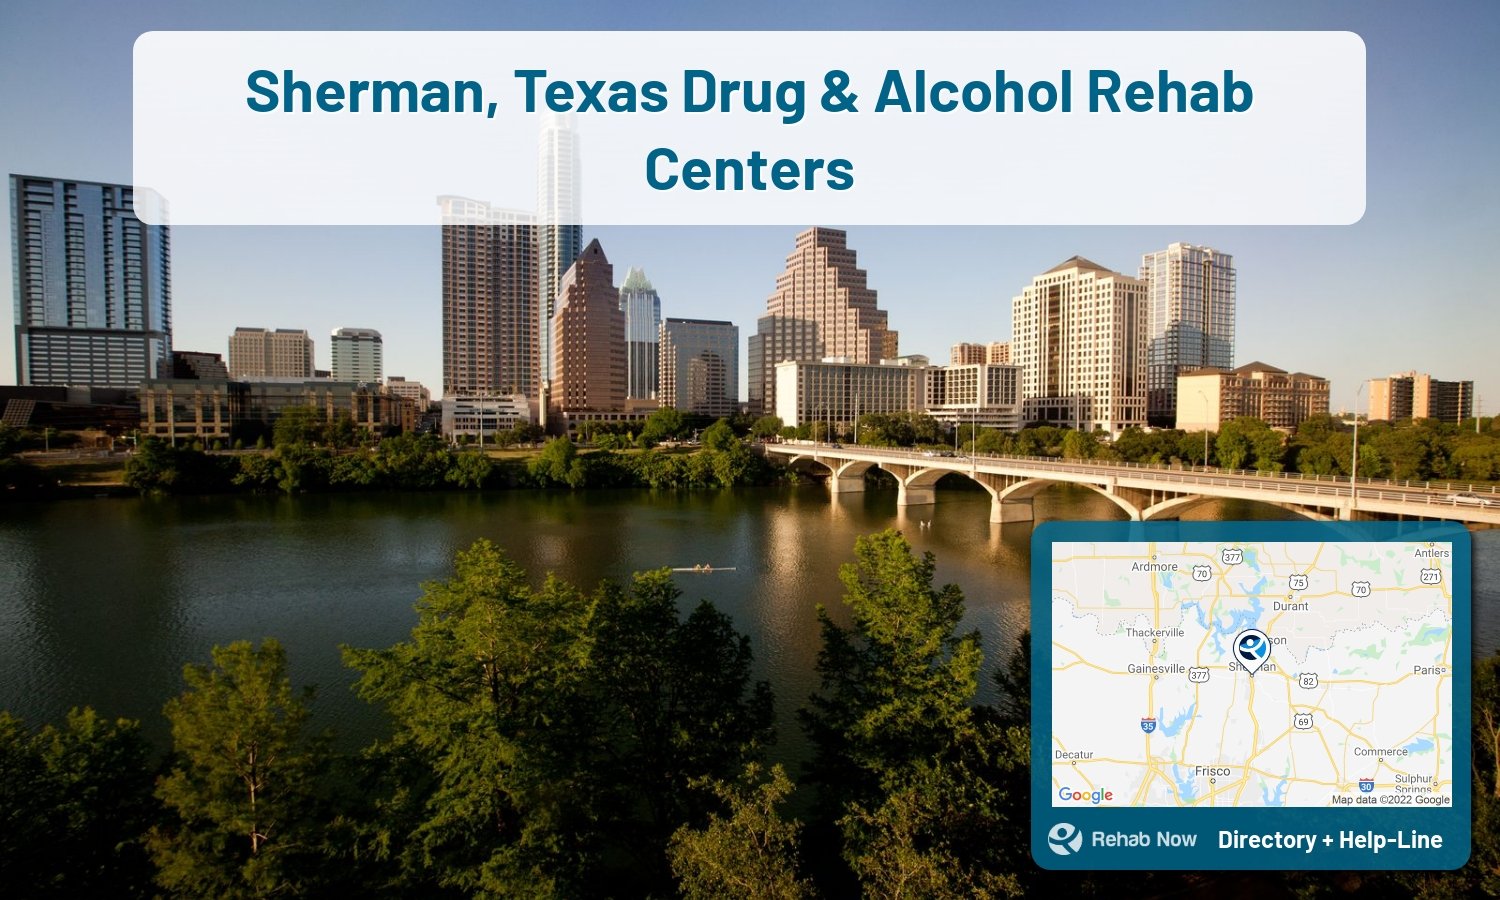 Our experts can help you find treatment now in Sherman, Texas. We list drug rehab and alcohol centers in Texas.